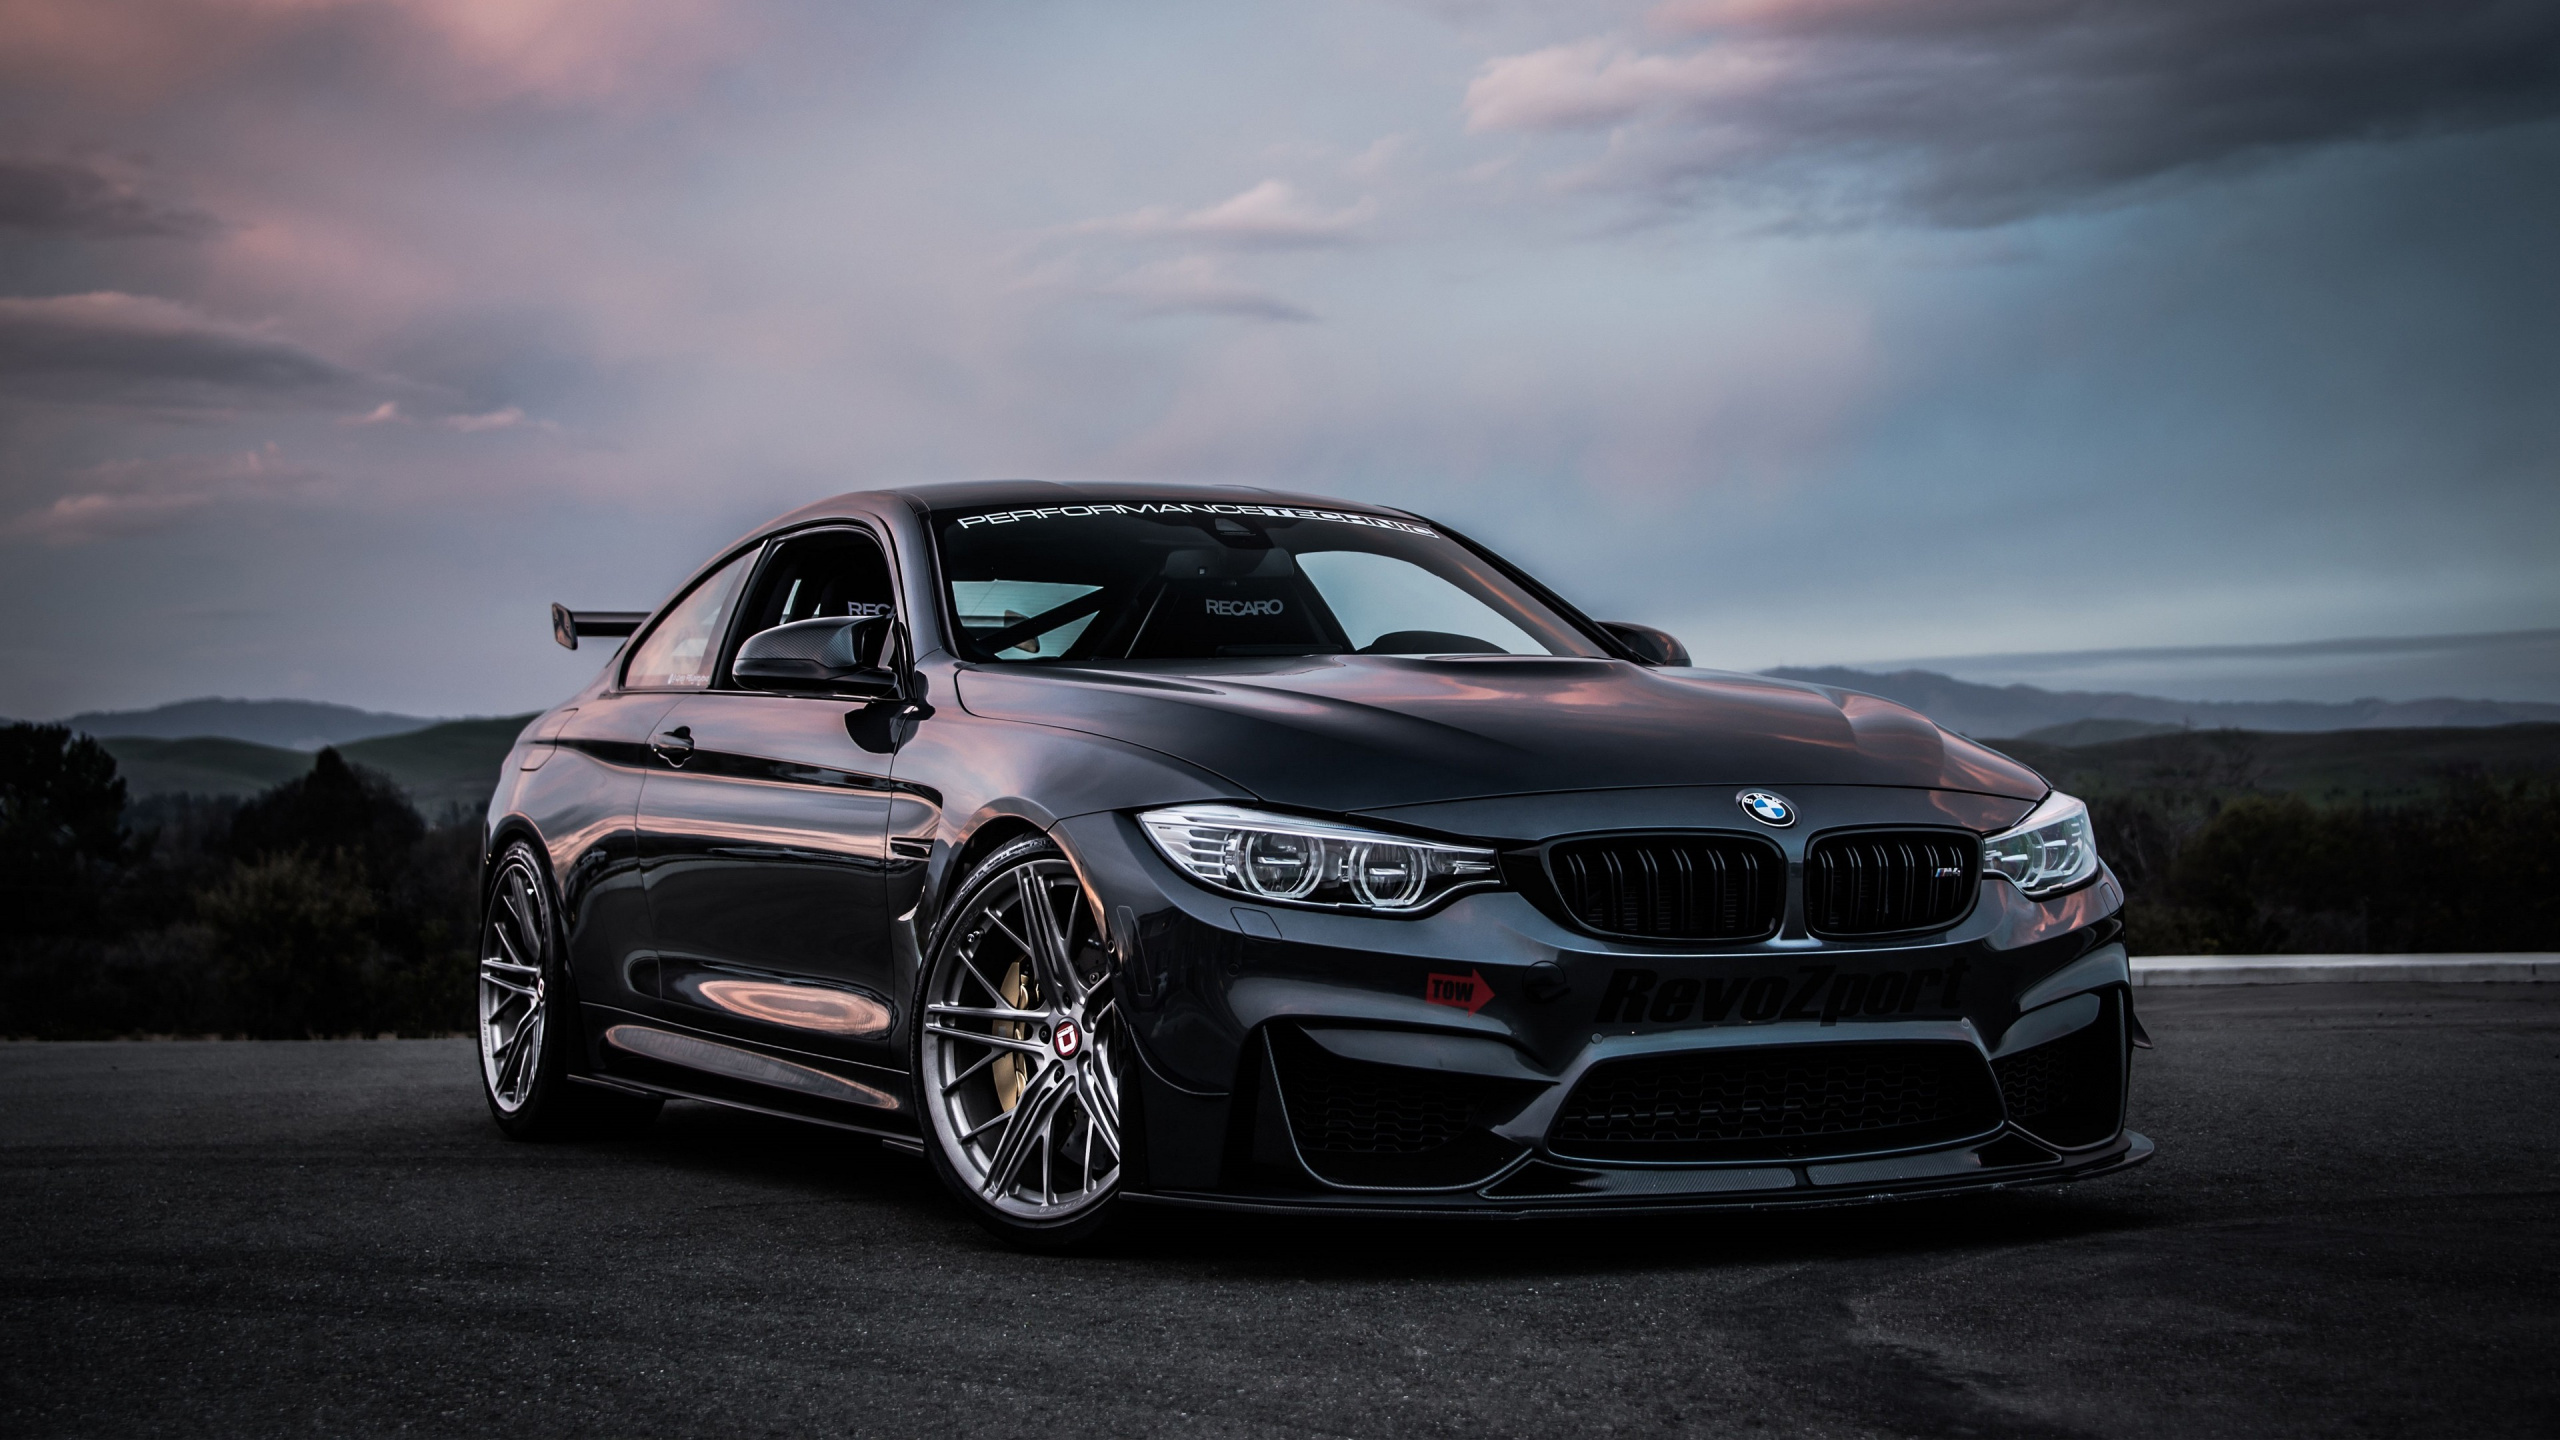 Black Bmw m 3 Coupe. Wallpaper in 2560x1440 Resolution